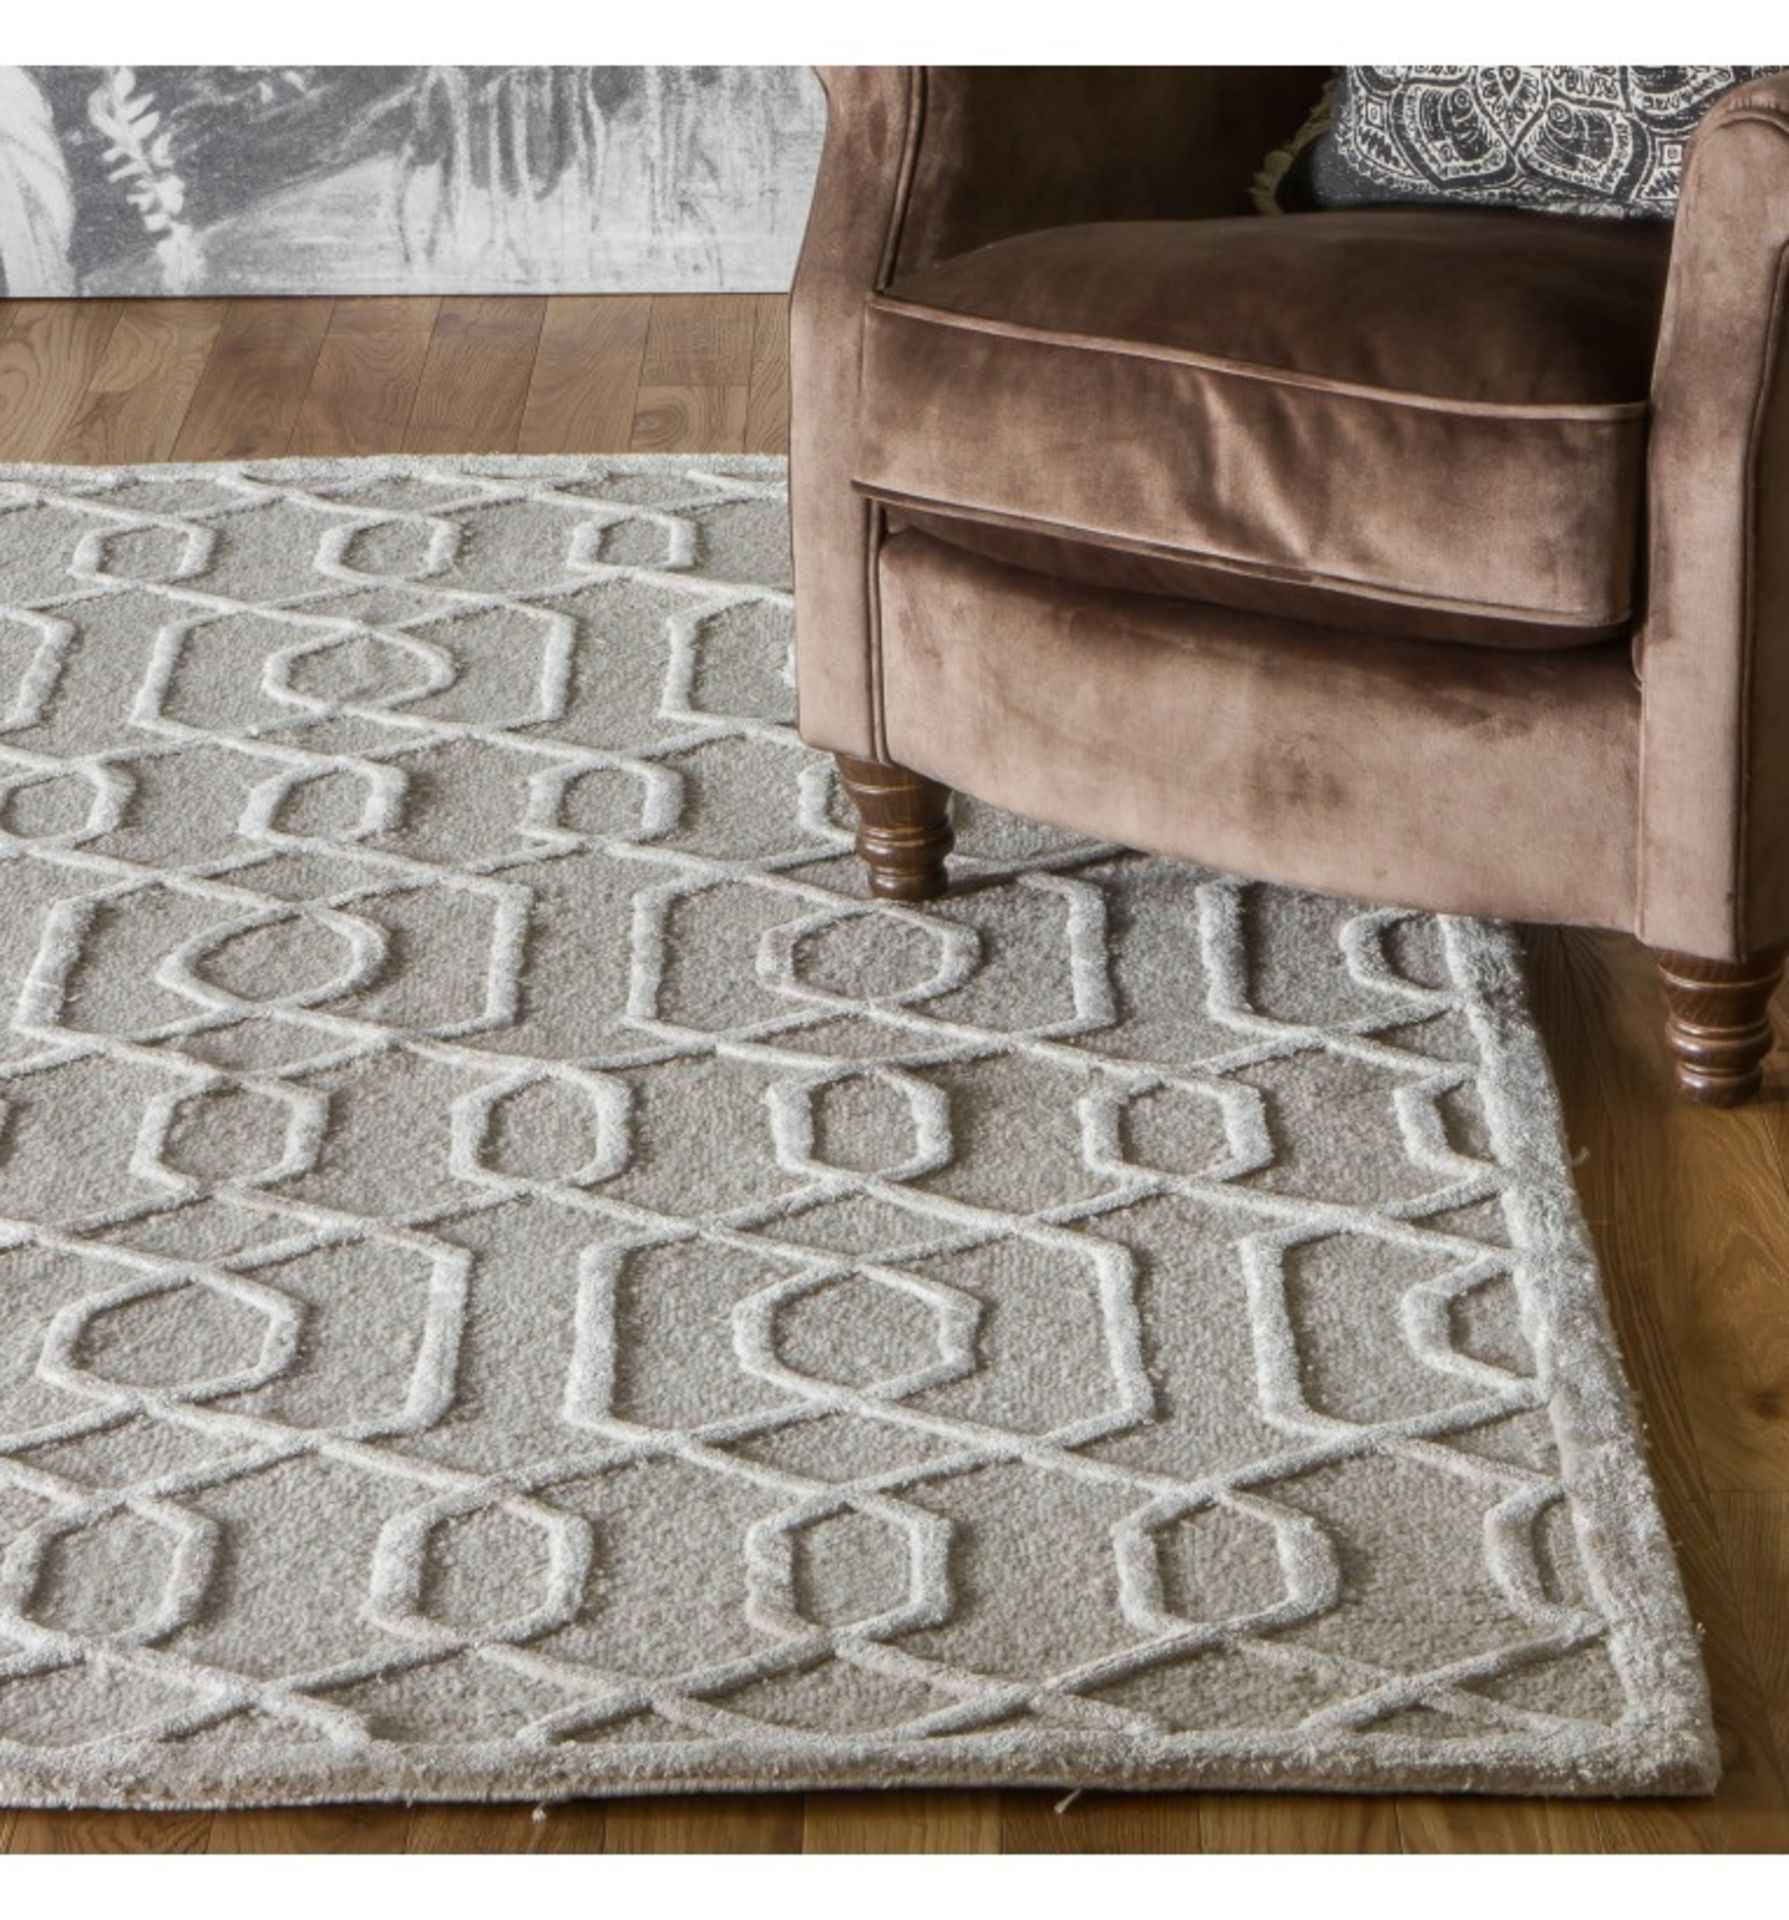 Rosefield Rug Natural Modern and elegant, this natural coloured rug is the perfect understated